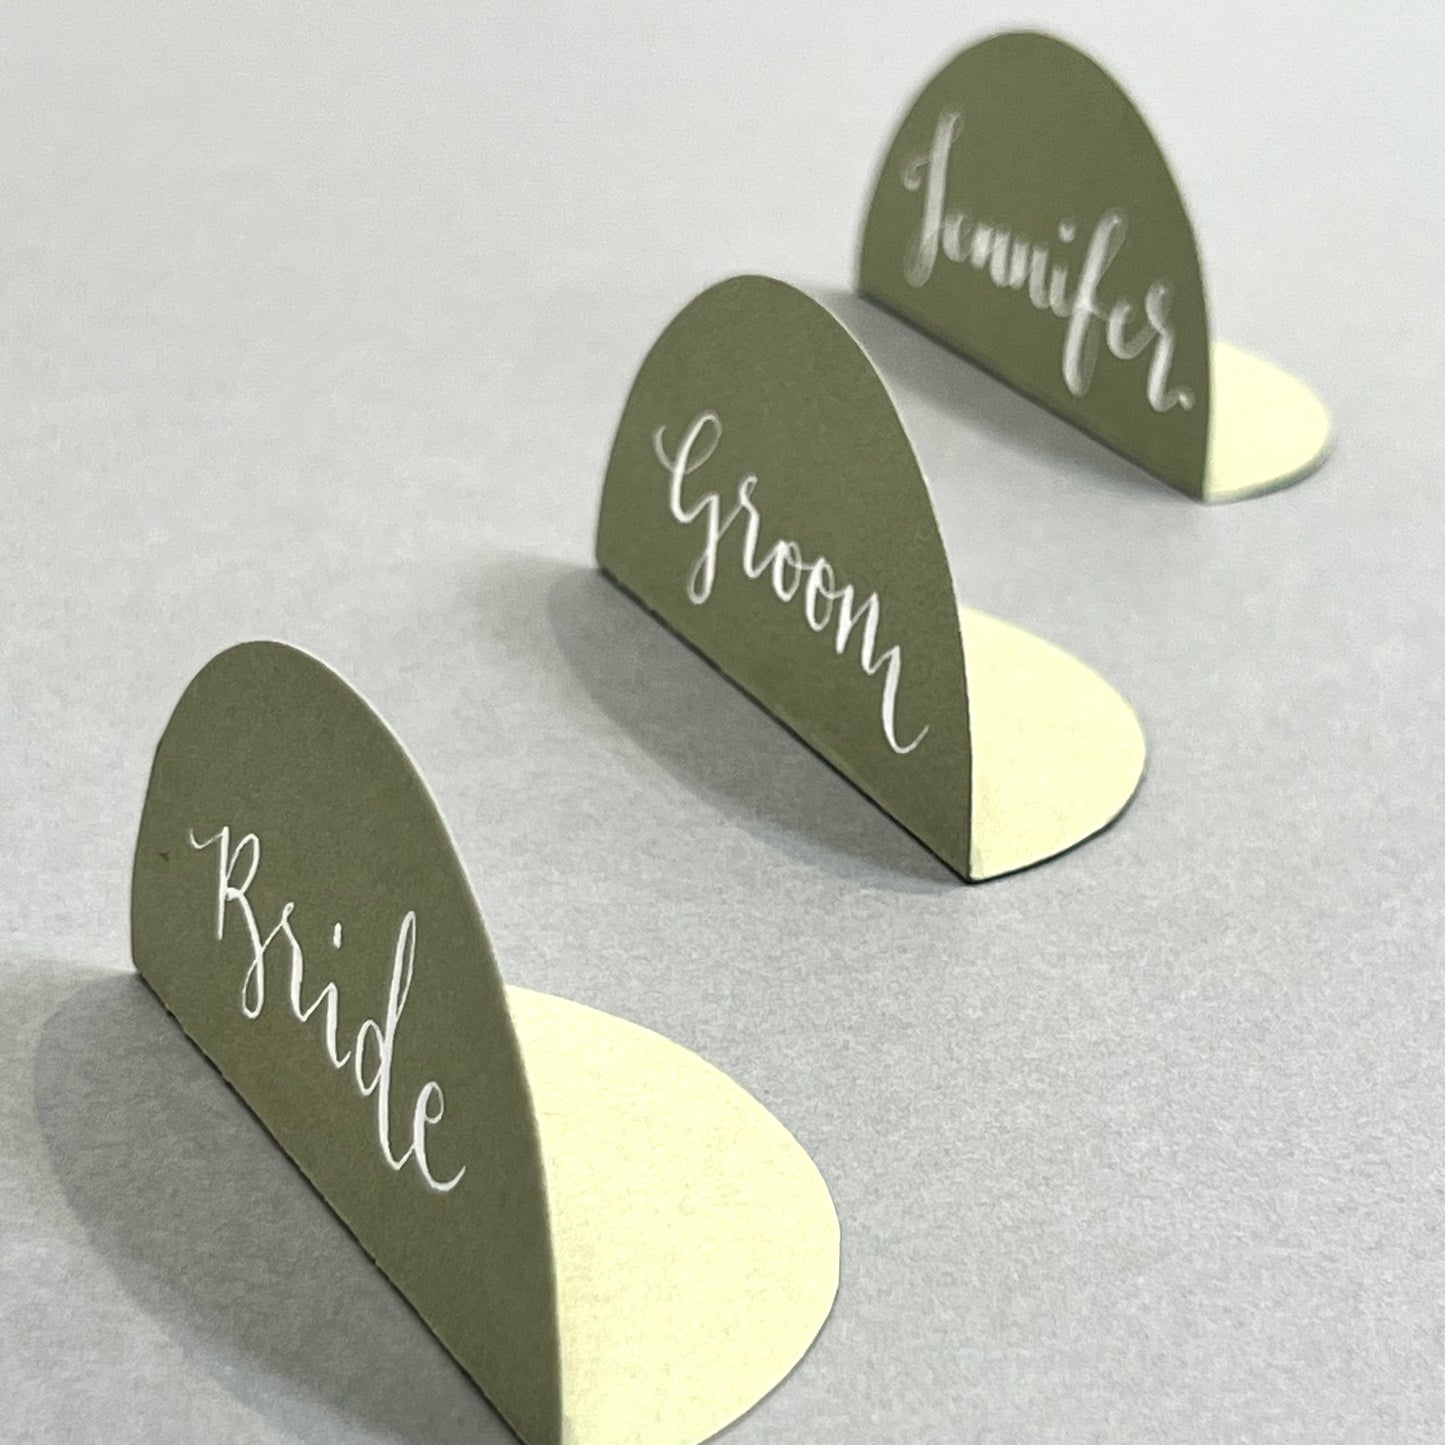 Modern folded circle place cards